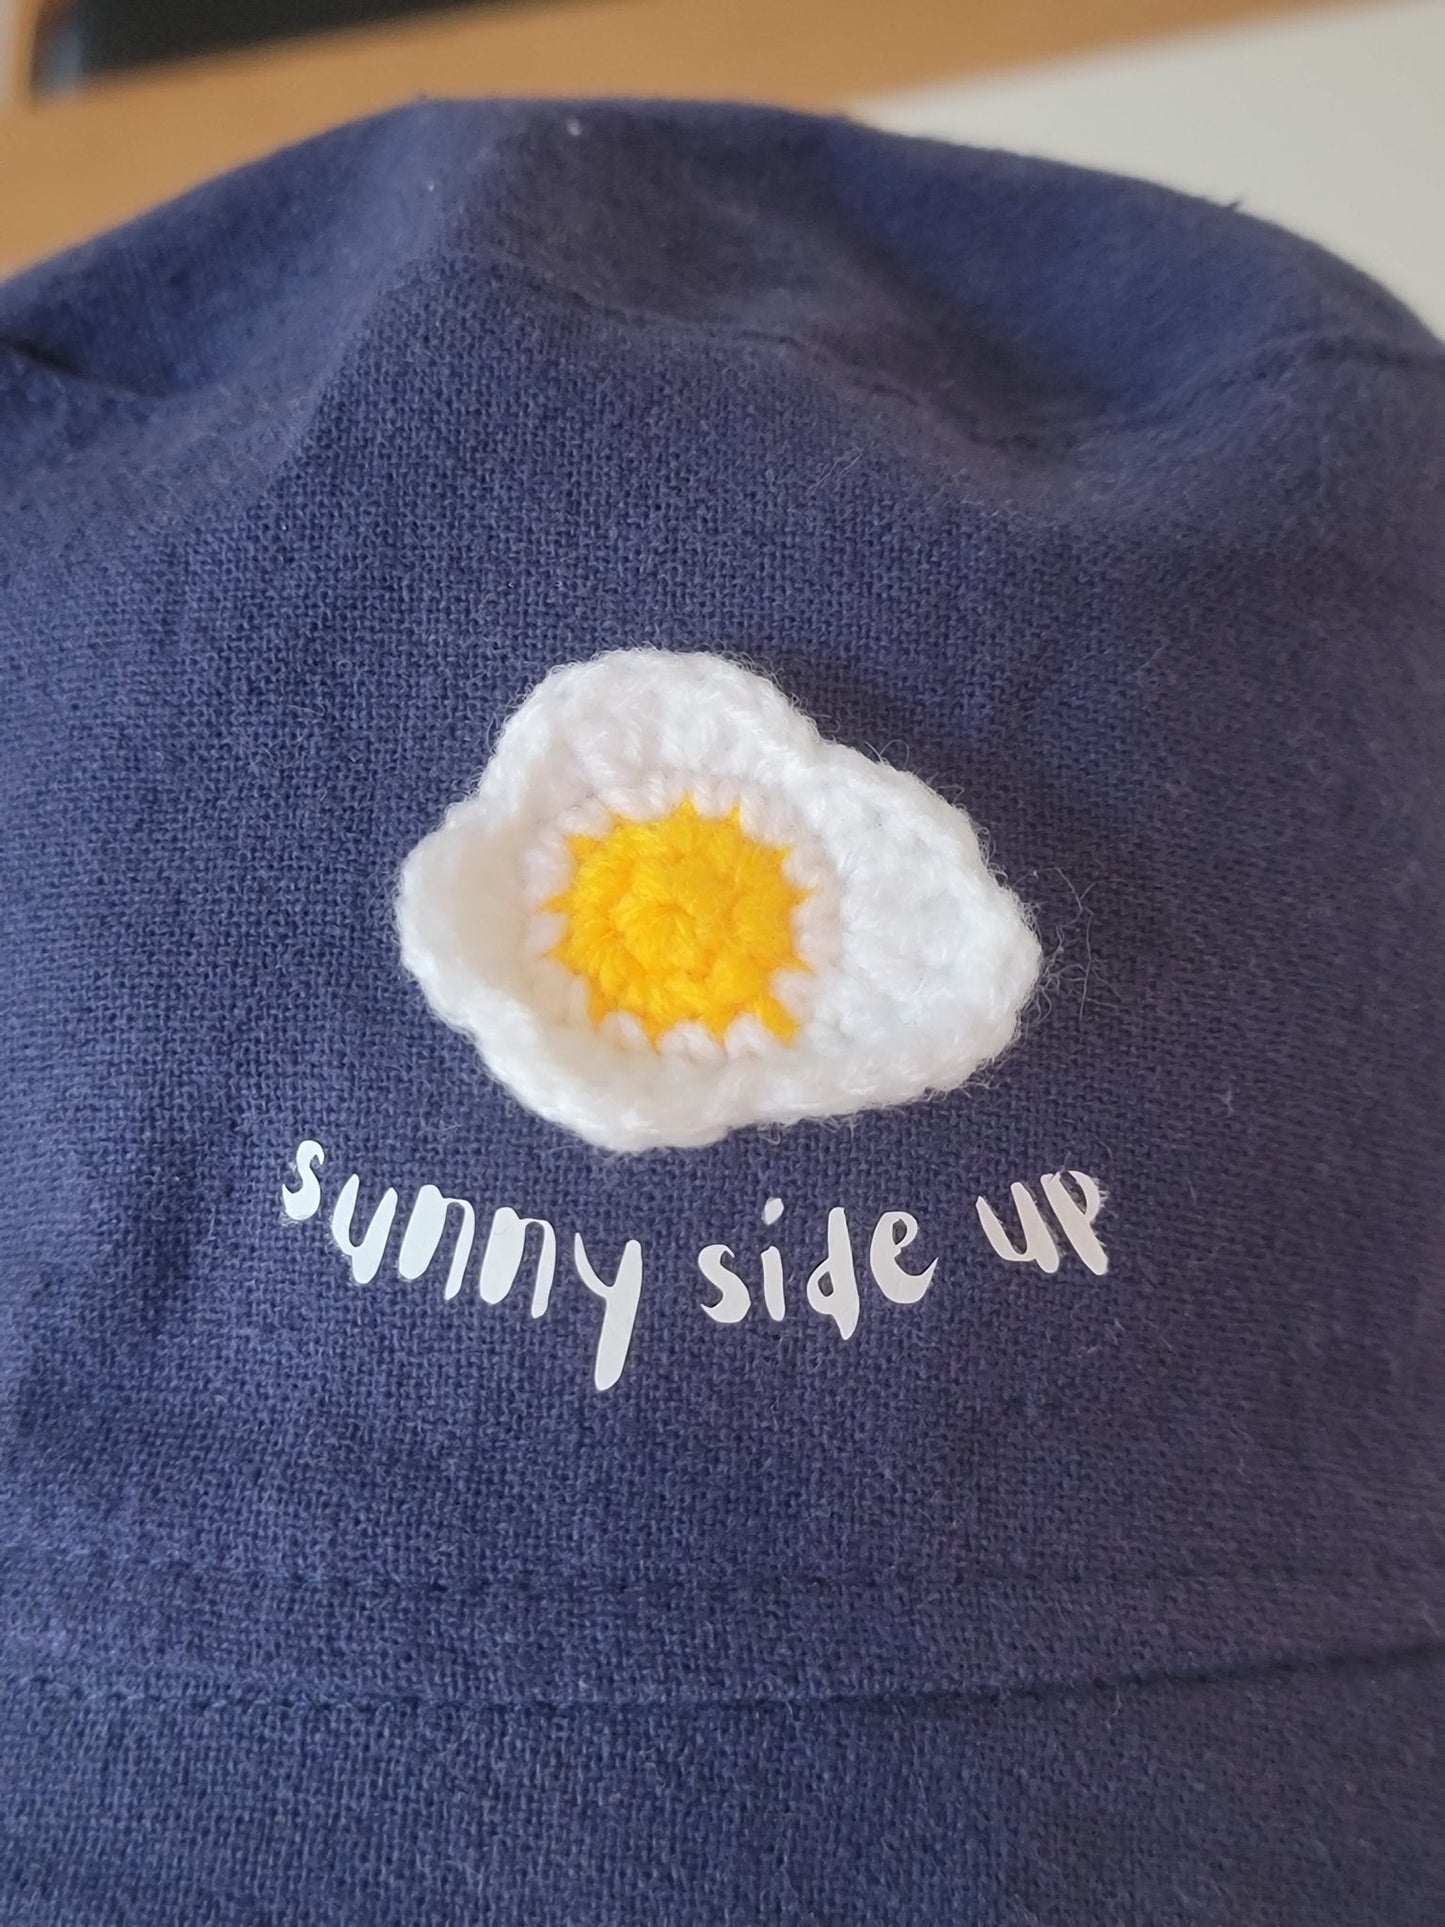 Bucket hat-Sunny side up-2